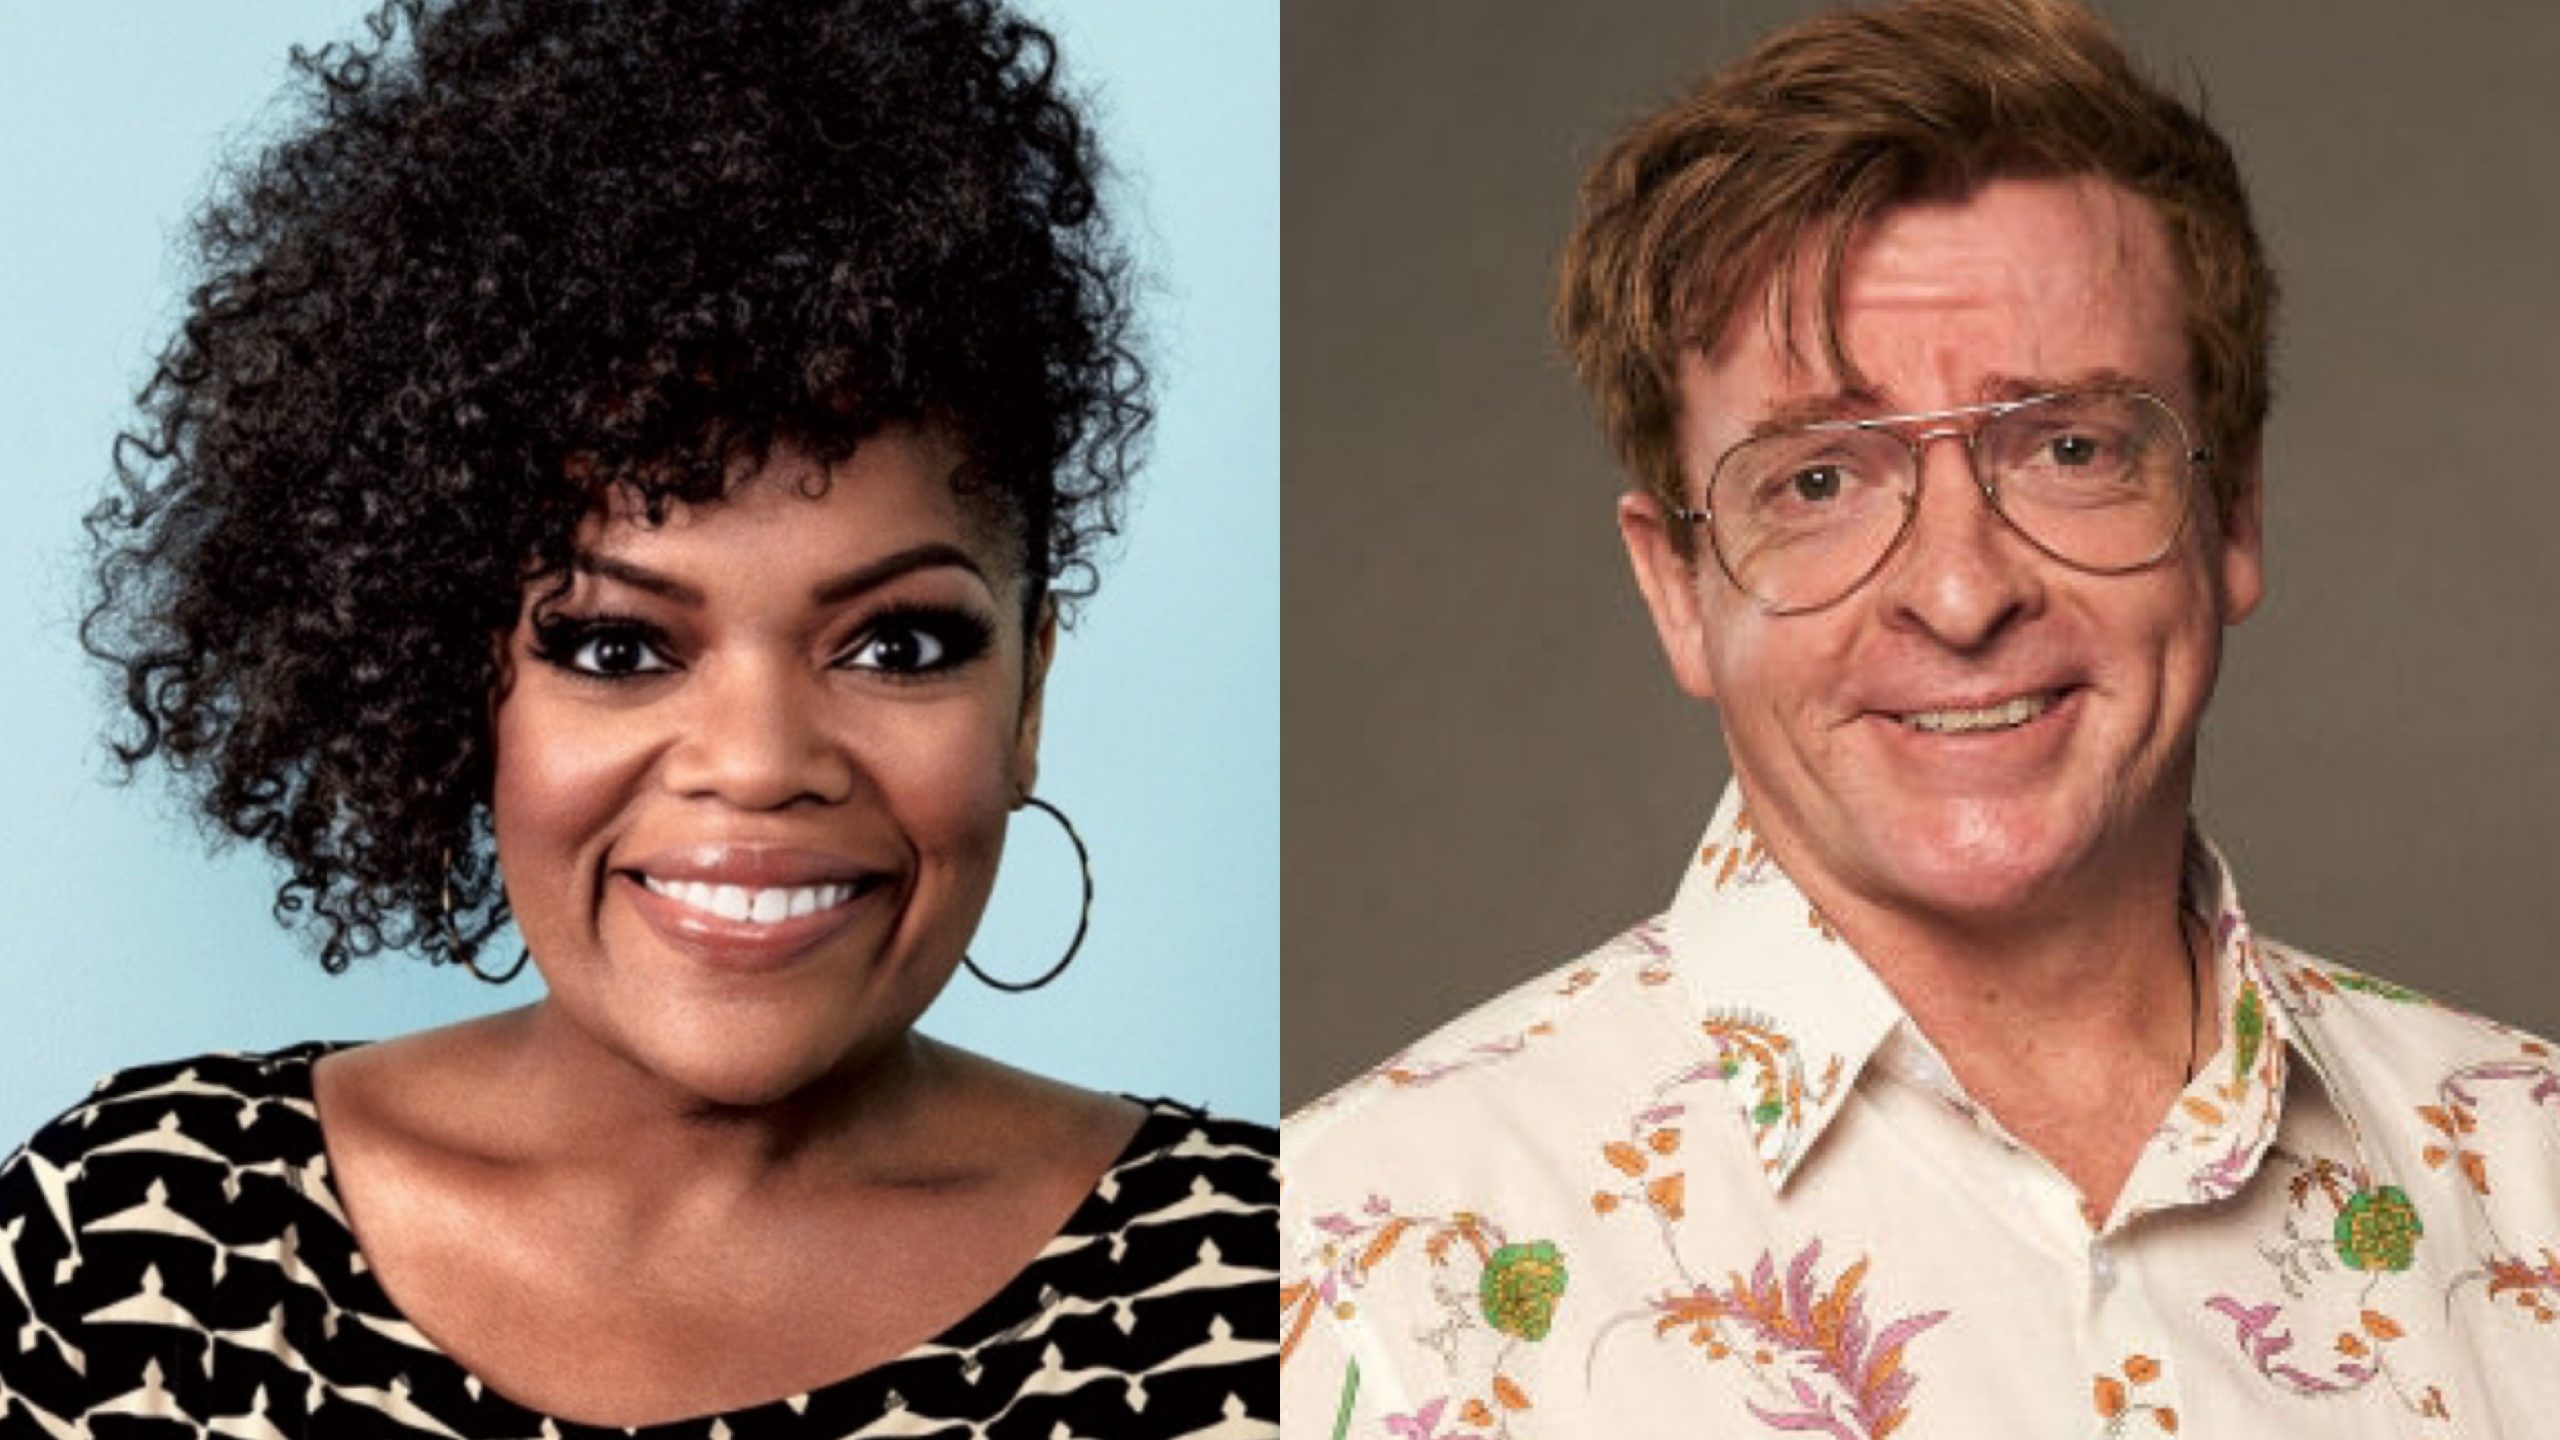 Yvette-Nicole-Brown-and-Rhys-Darby-To-Host-The-Big-Fib